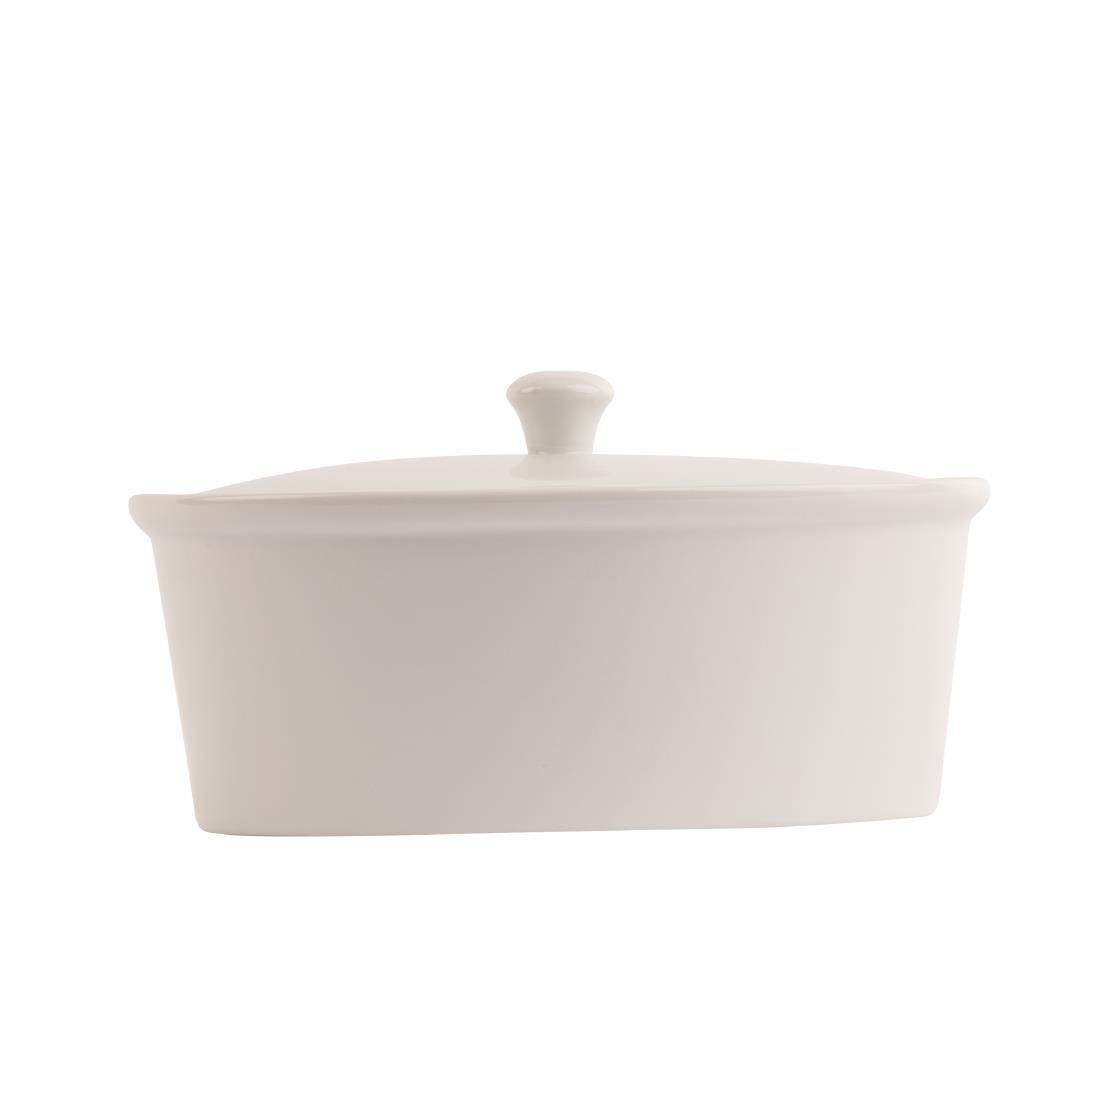 Olympia Whiteware Oval Casserole Dish with Lid 2.2Ltr - CB712  - 2